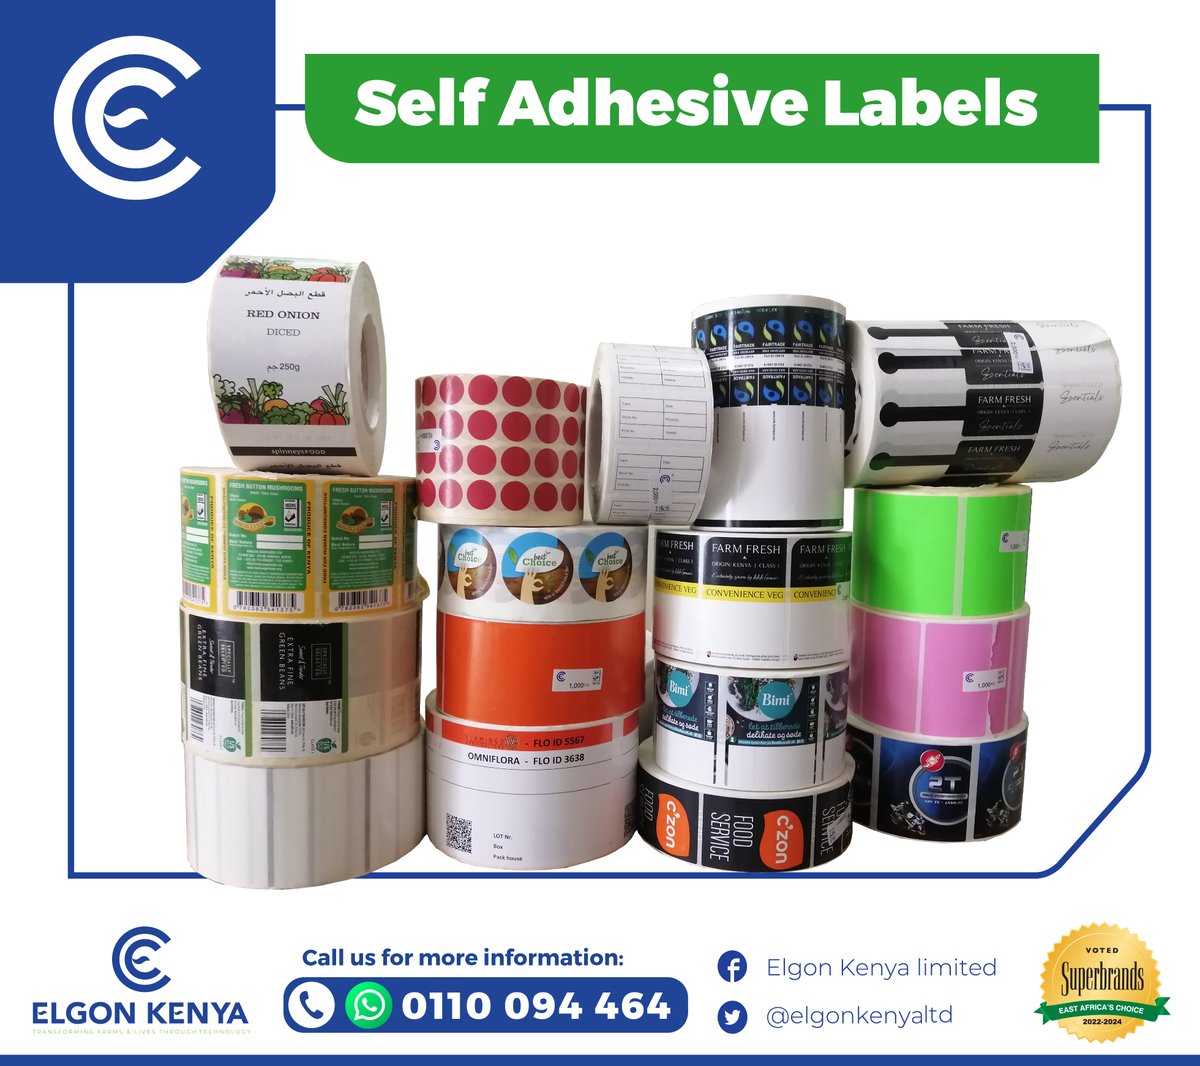 Transform your packaging with our high-quality, self-adhesive labels. They stick securely to any surface.

Choose from a variety of sizes and shapes to fit your needs. 

For more information call us on 0110 094 464

 #selfadhesivelabels #elgonkenya  #labelsticker #labels